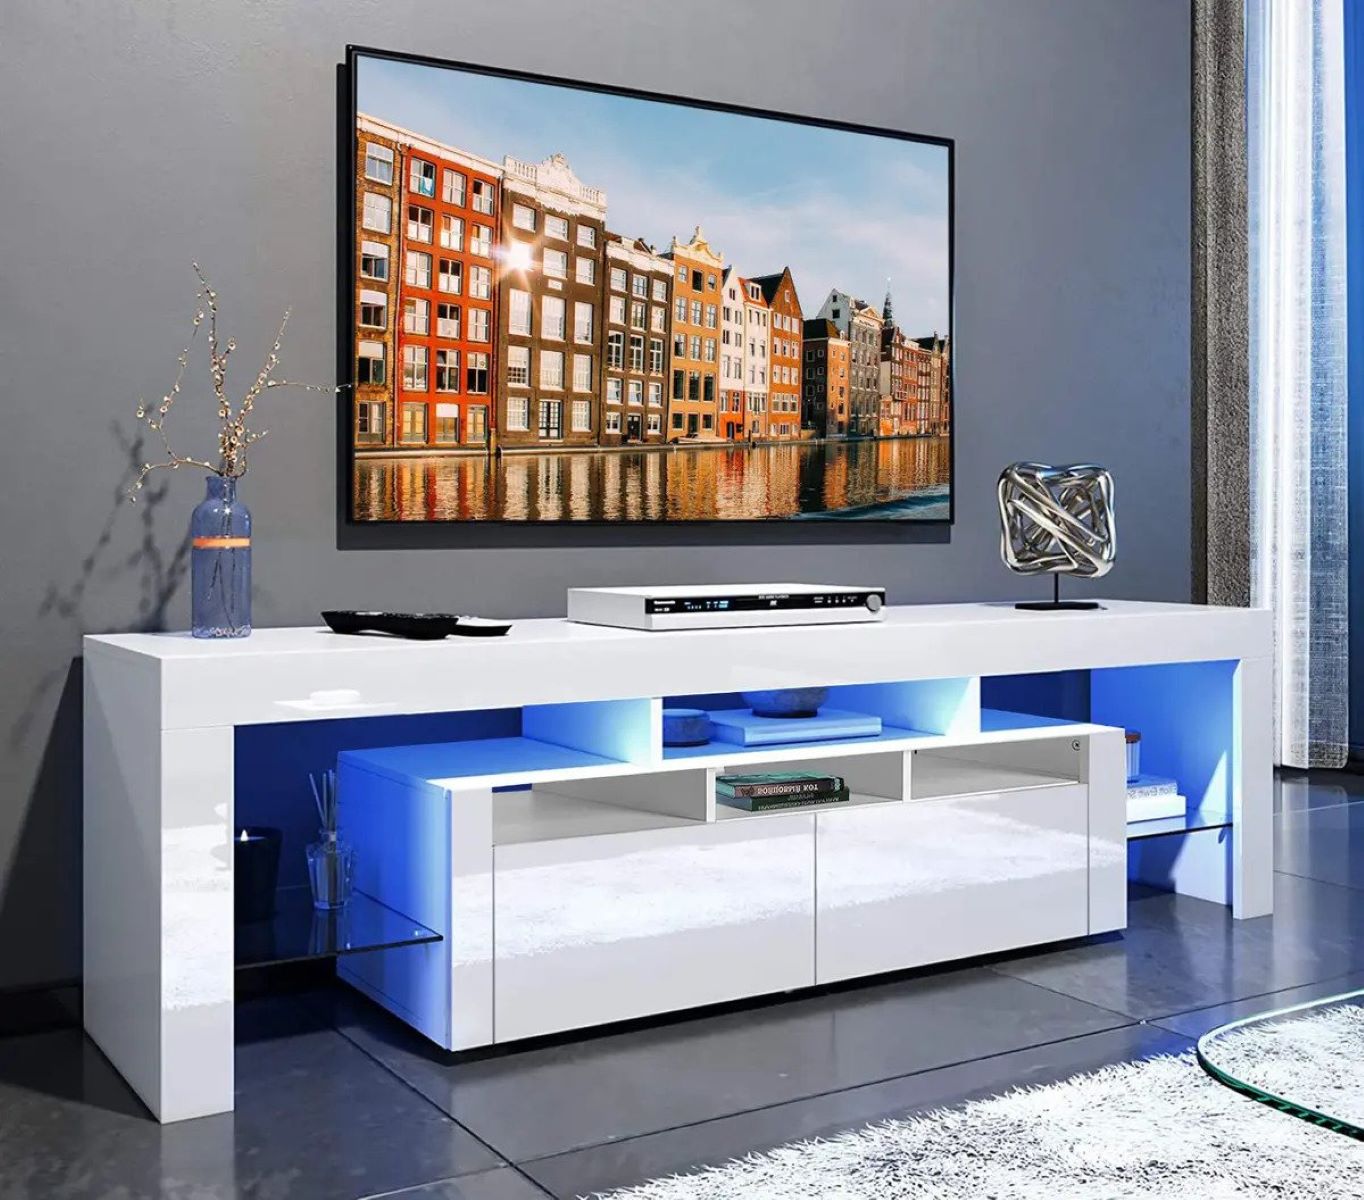 How To Install LED Lights On TV Stand